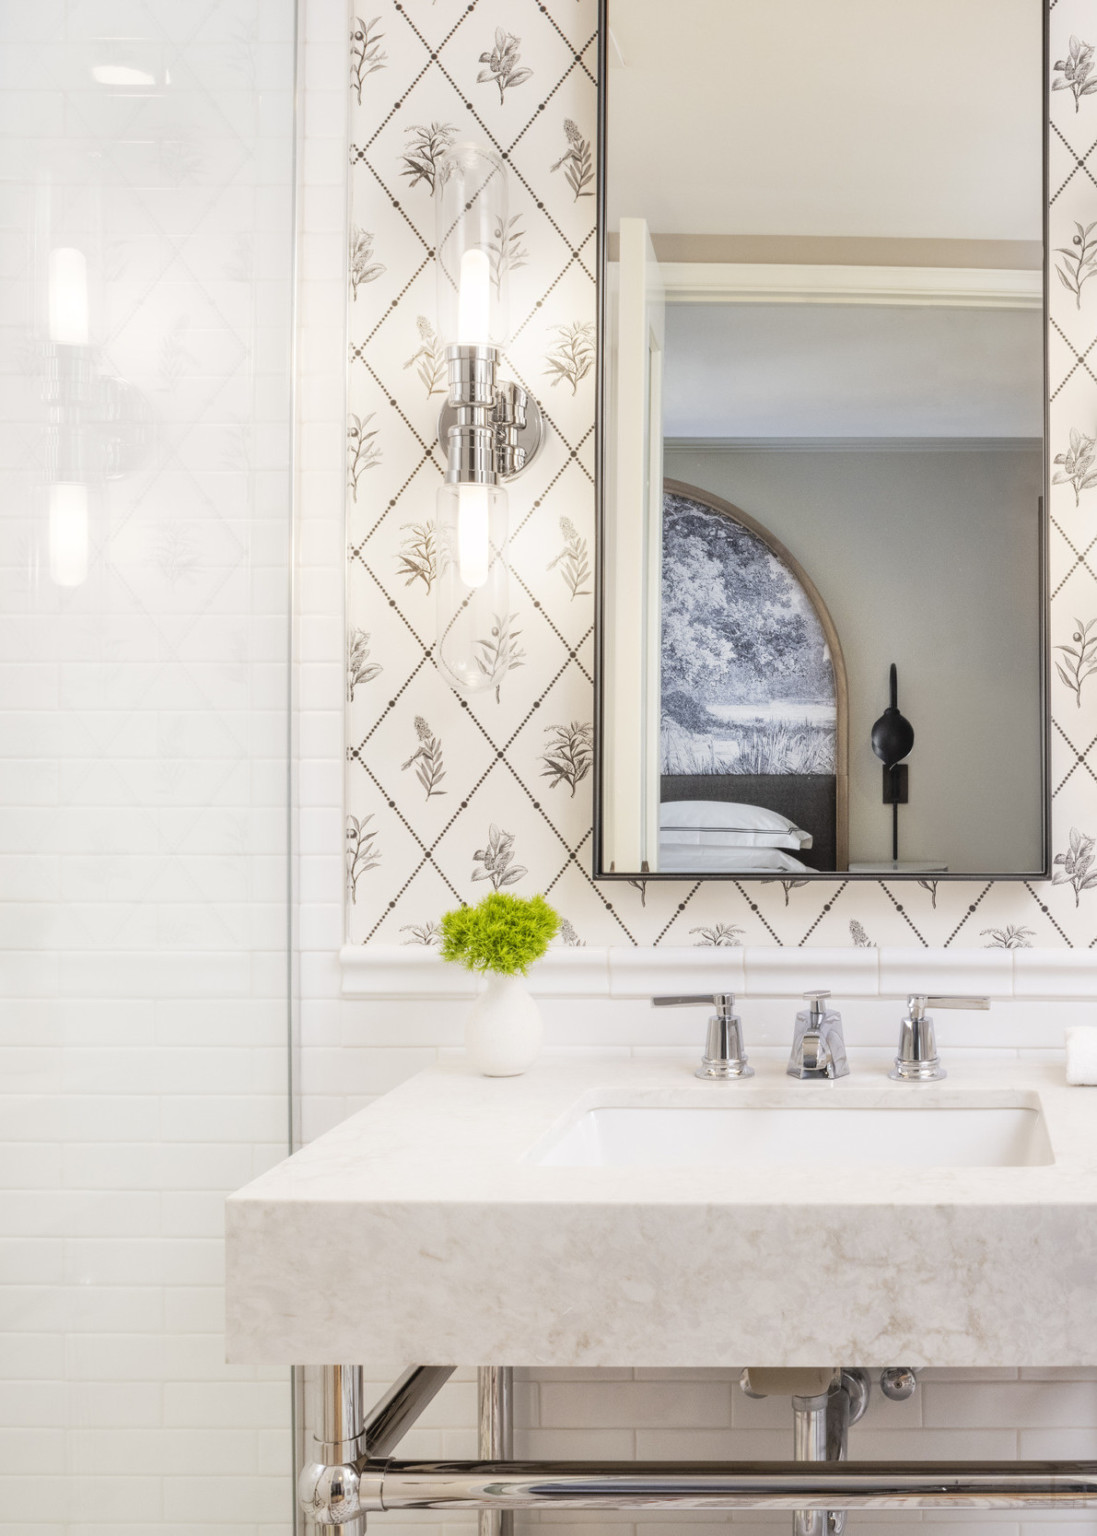 White marble sink on white tiled wall with black and white floral wall paper detail above. Mirror over sink reflects the bed